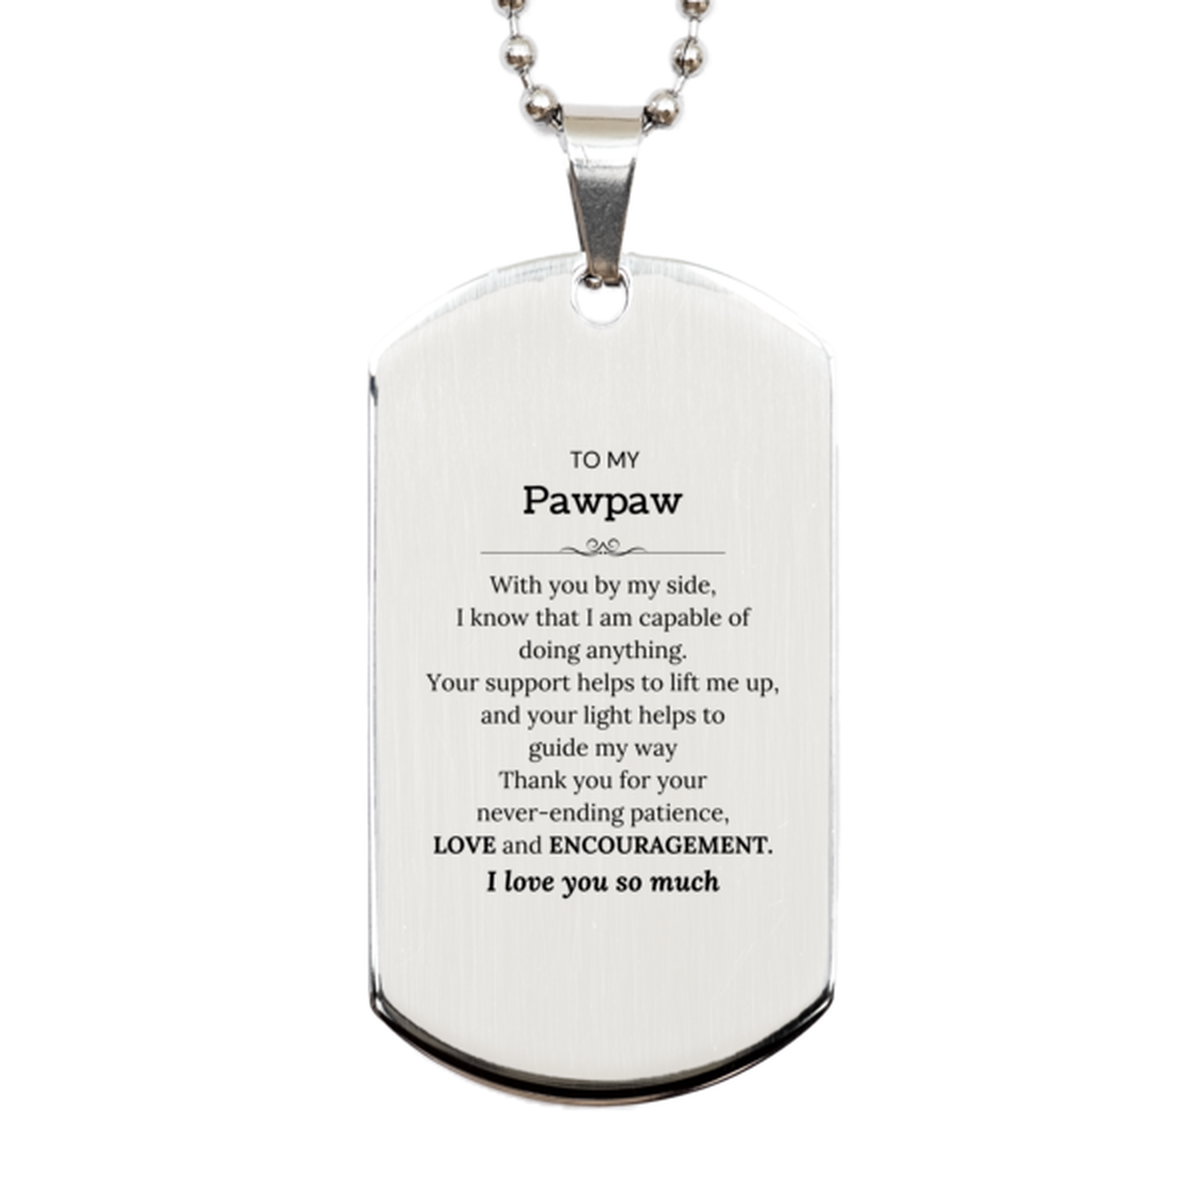 Appreciation Pawpaw Silver Dog Tag Gifts, To My Pawpaw Birthday Christmas Wedding Keepsake Gifts for Pawpaw With you by my side, I know that I am capable of doing anything. I love you so much